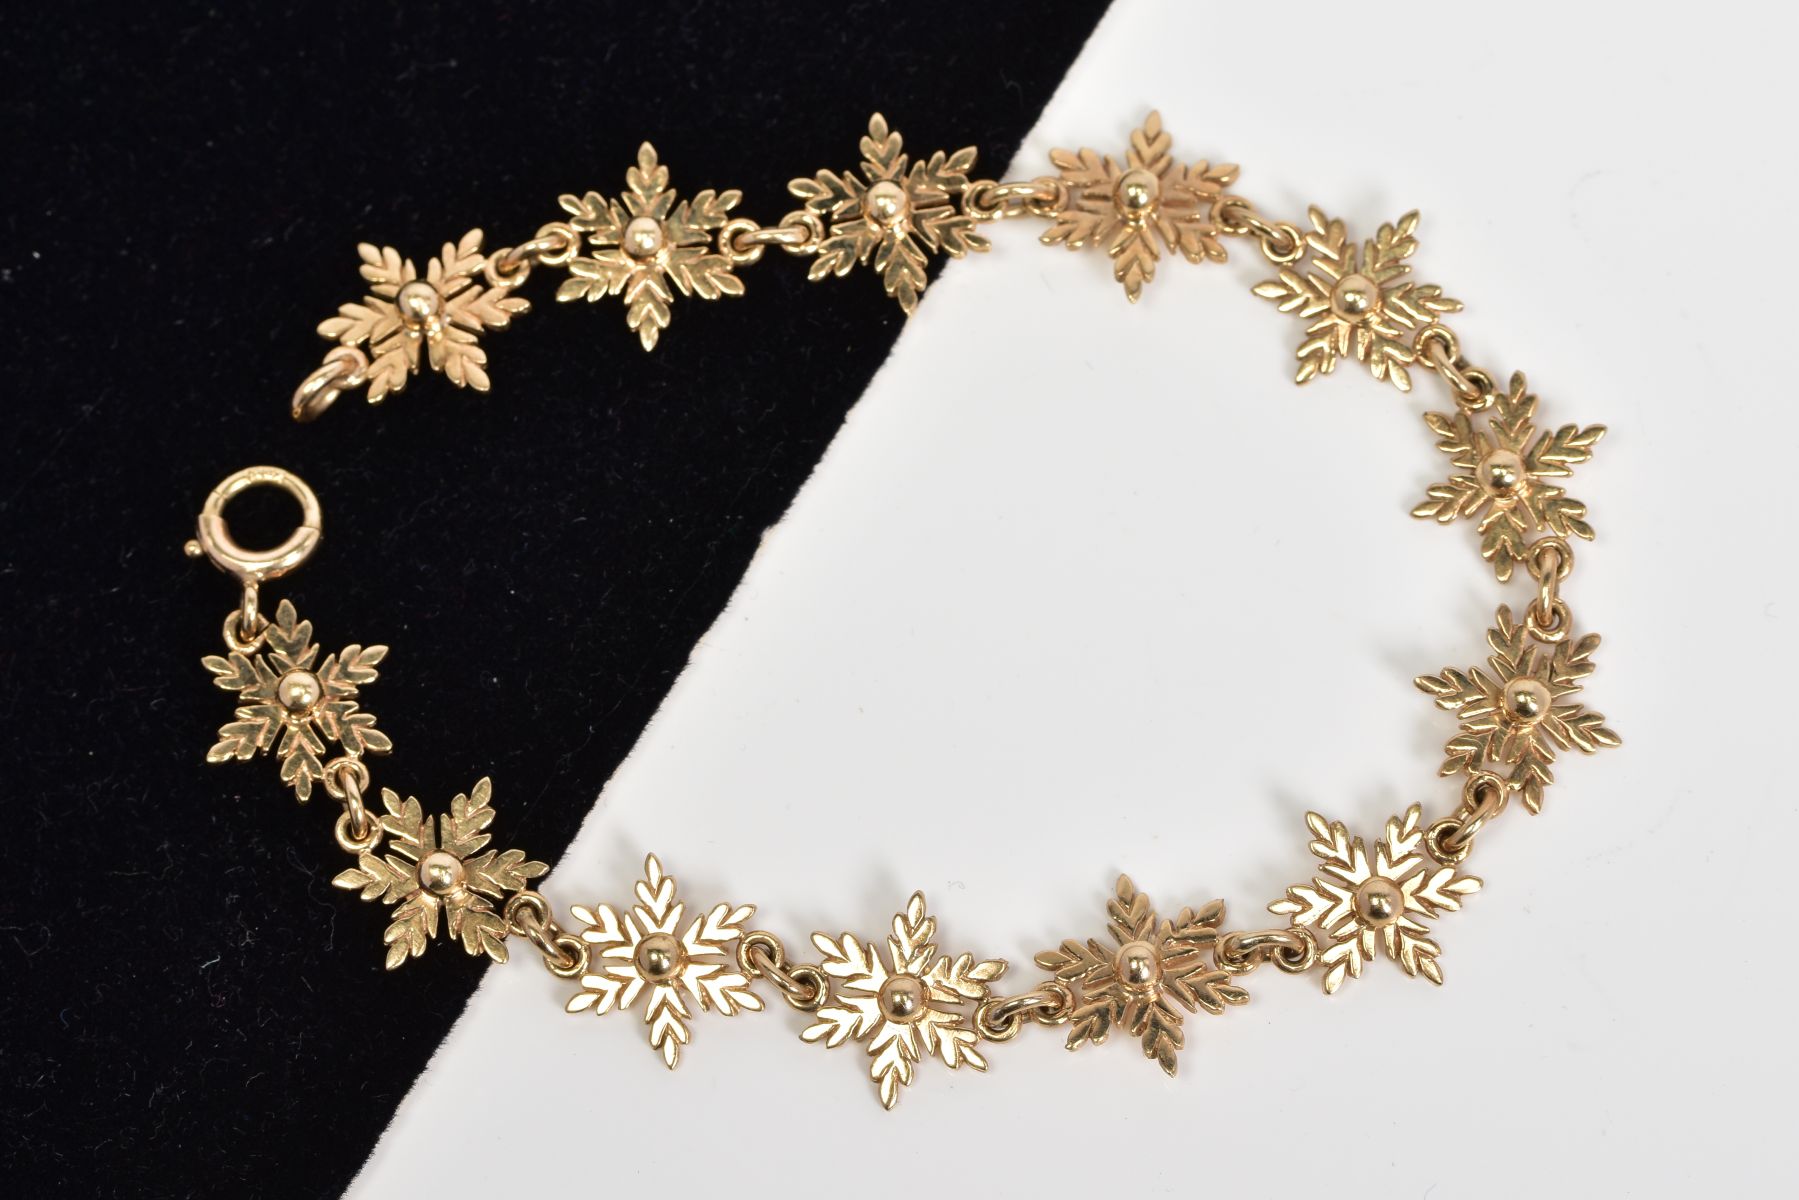 A 9CT GOLD SNOWFLAKE LINK BRACELET, made up of thirteen snowflakes with spherical centres, fitted